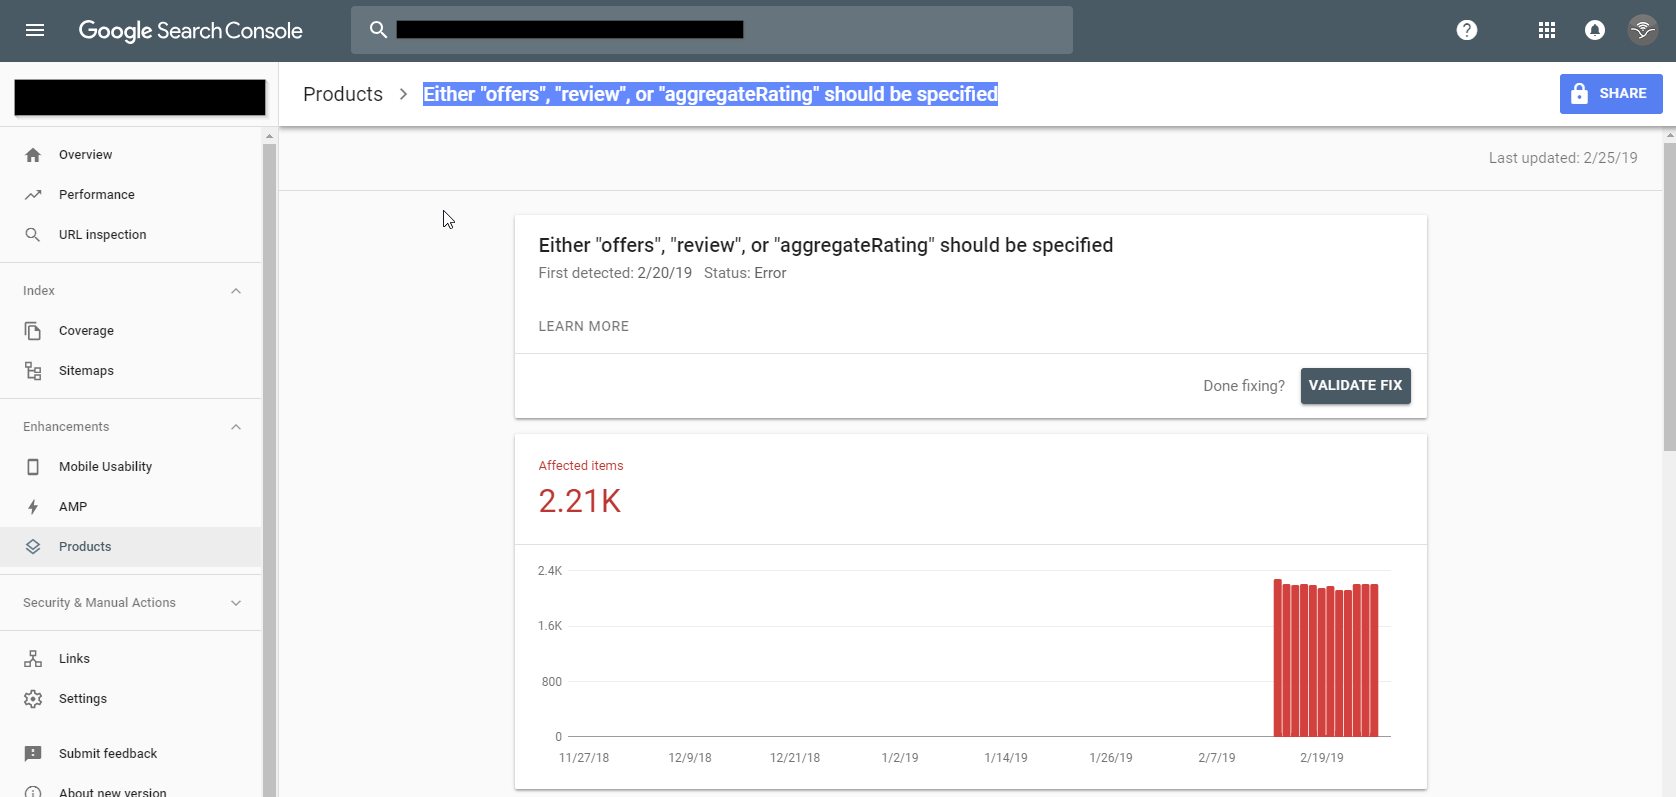 Google Search Console Schema Error: "Either "offers", "review", or "aggregateRating" should be specified"